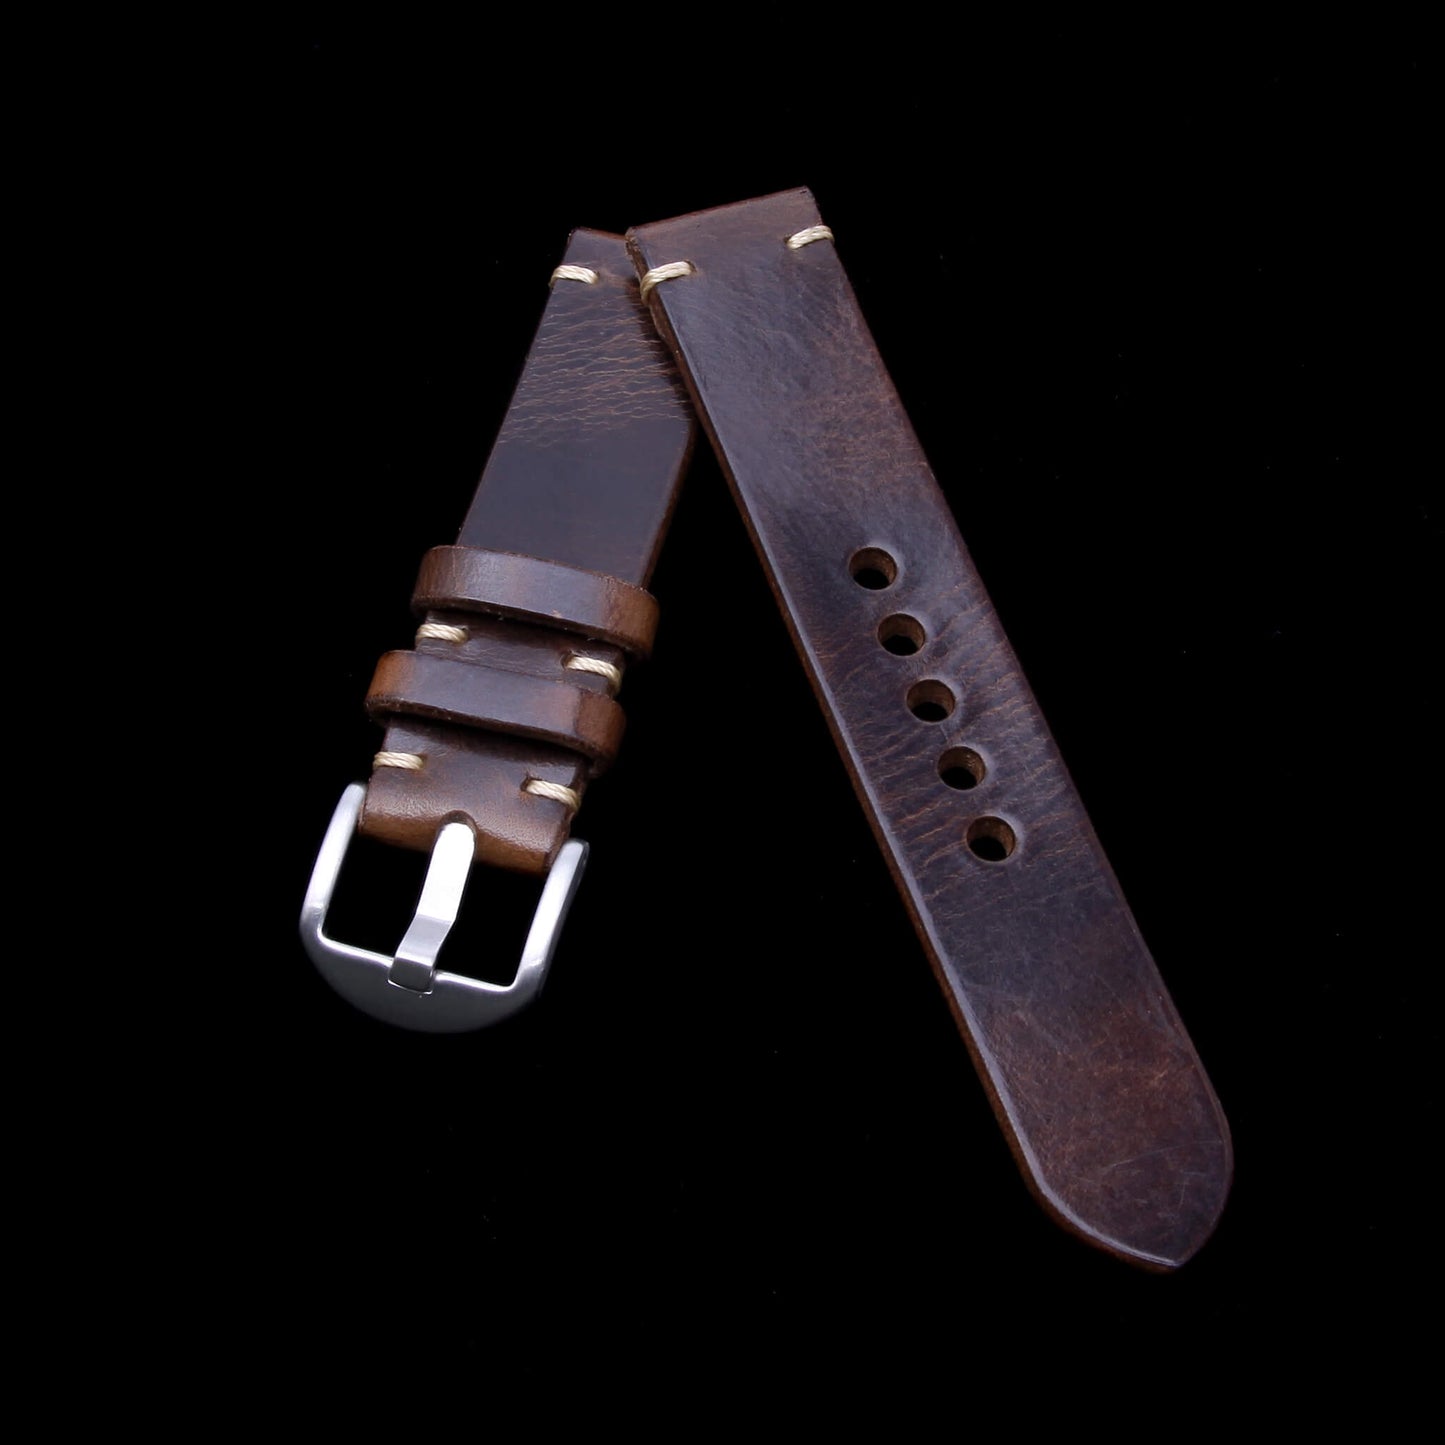 Camouflage cool: Italian veg-tanned leather watch strap for Apple Watch, handcrafted for a unique, military-inspired style.